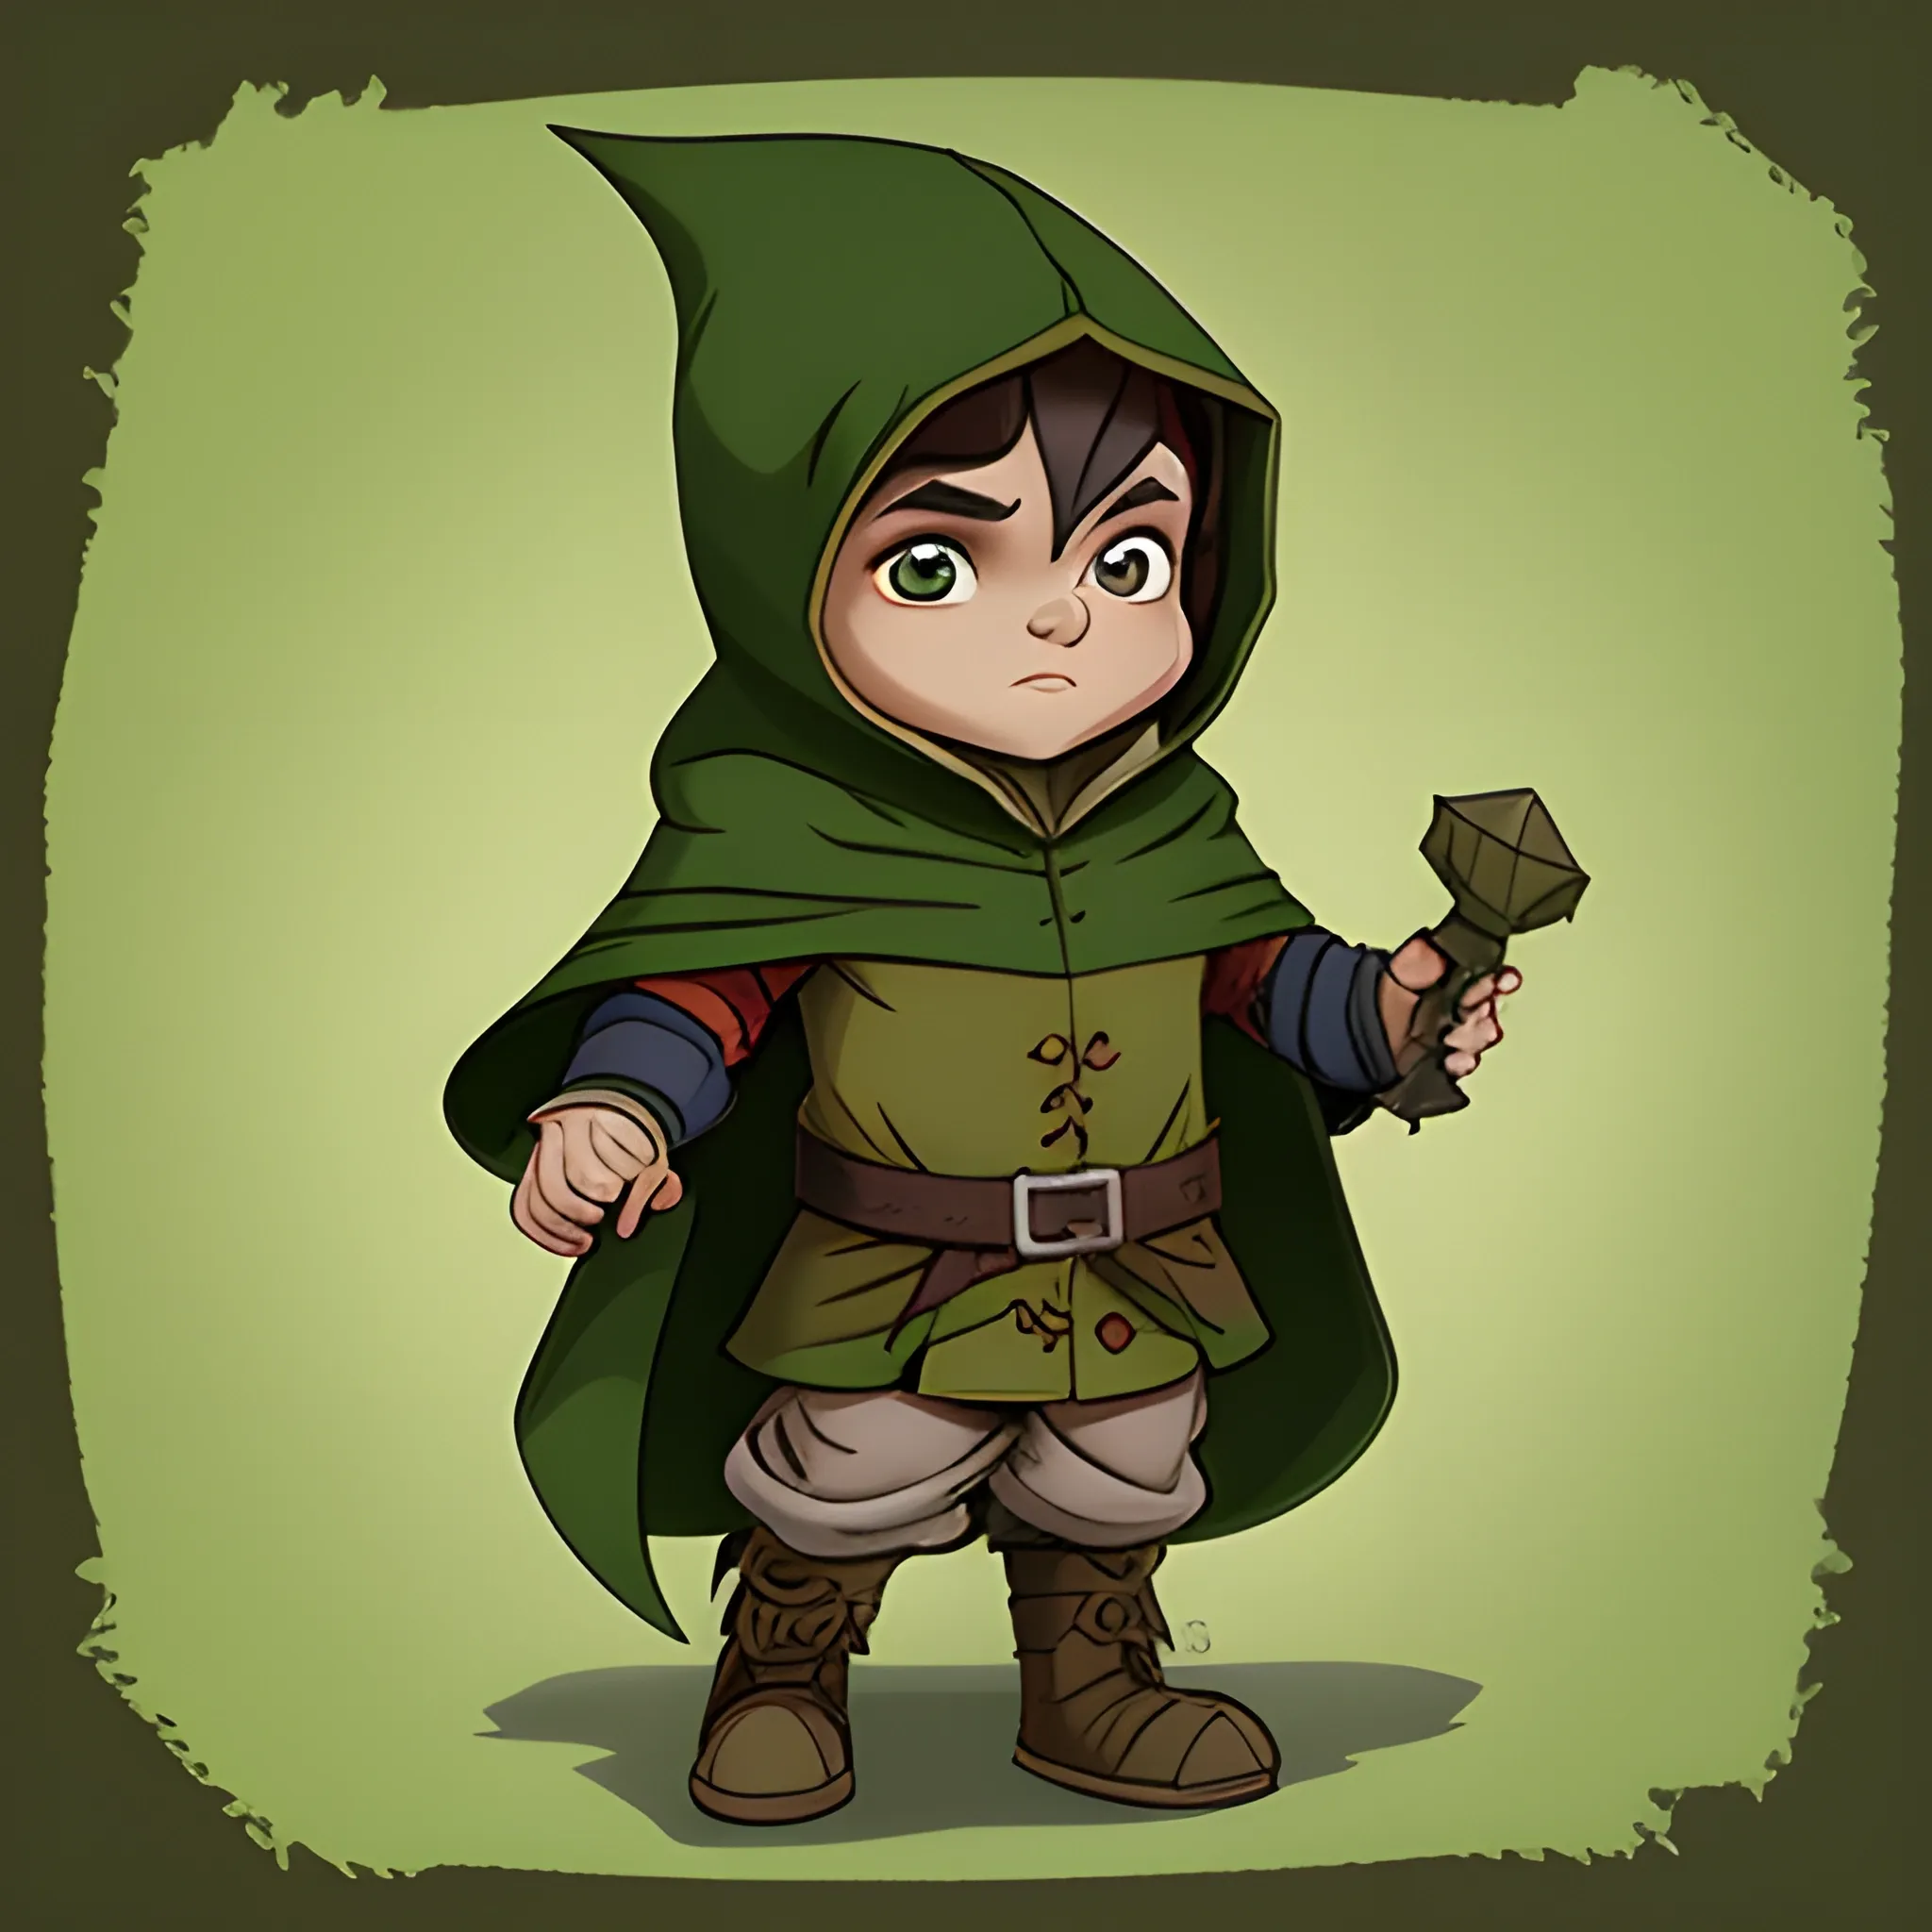 dungeons and dragons, gnome, rogue, green eyes, brown hair, tan skin, hooded cloak, short, black outfit, green trim, Cartoon